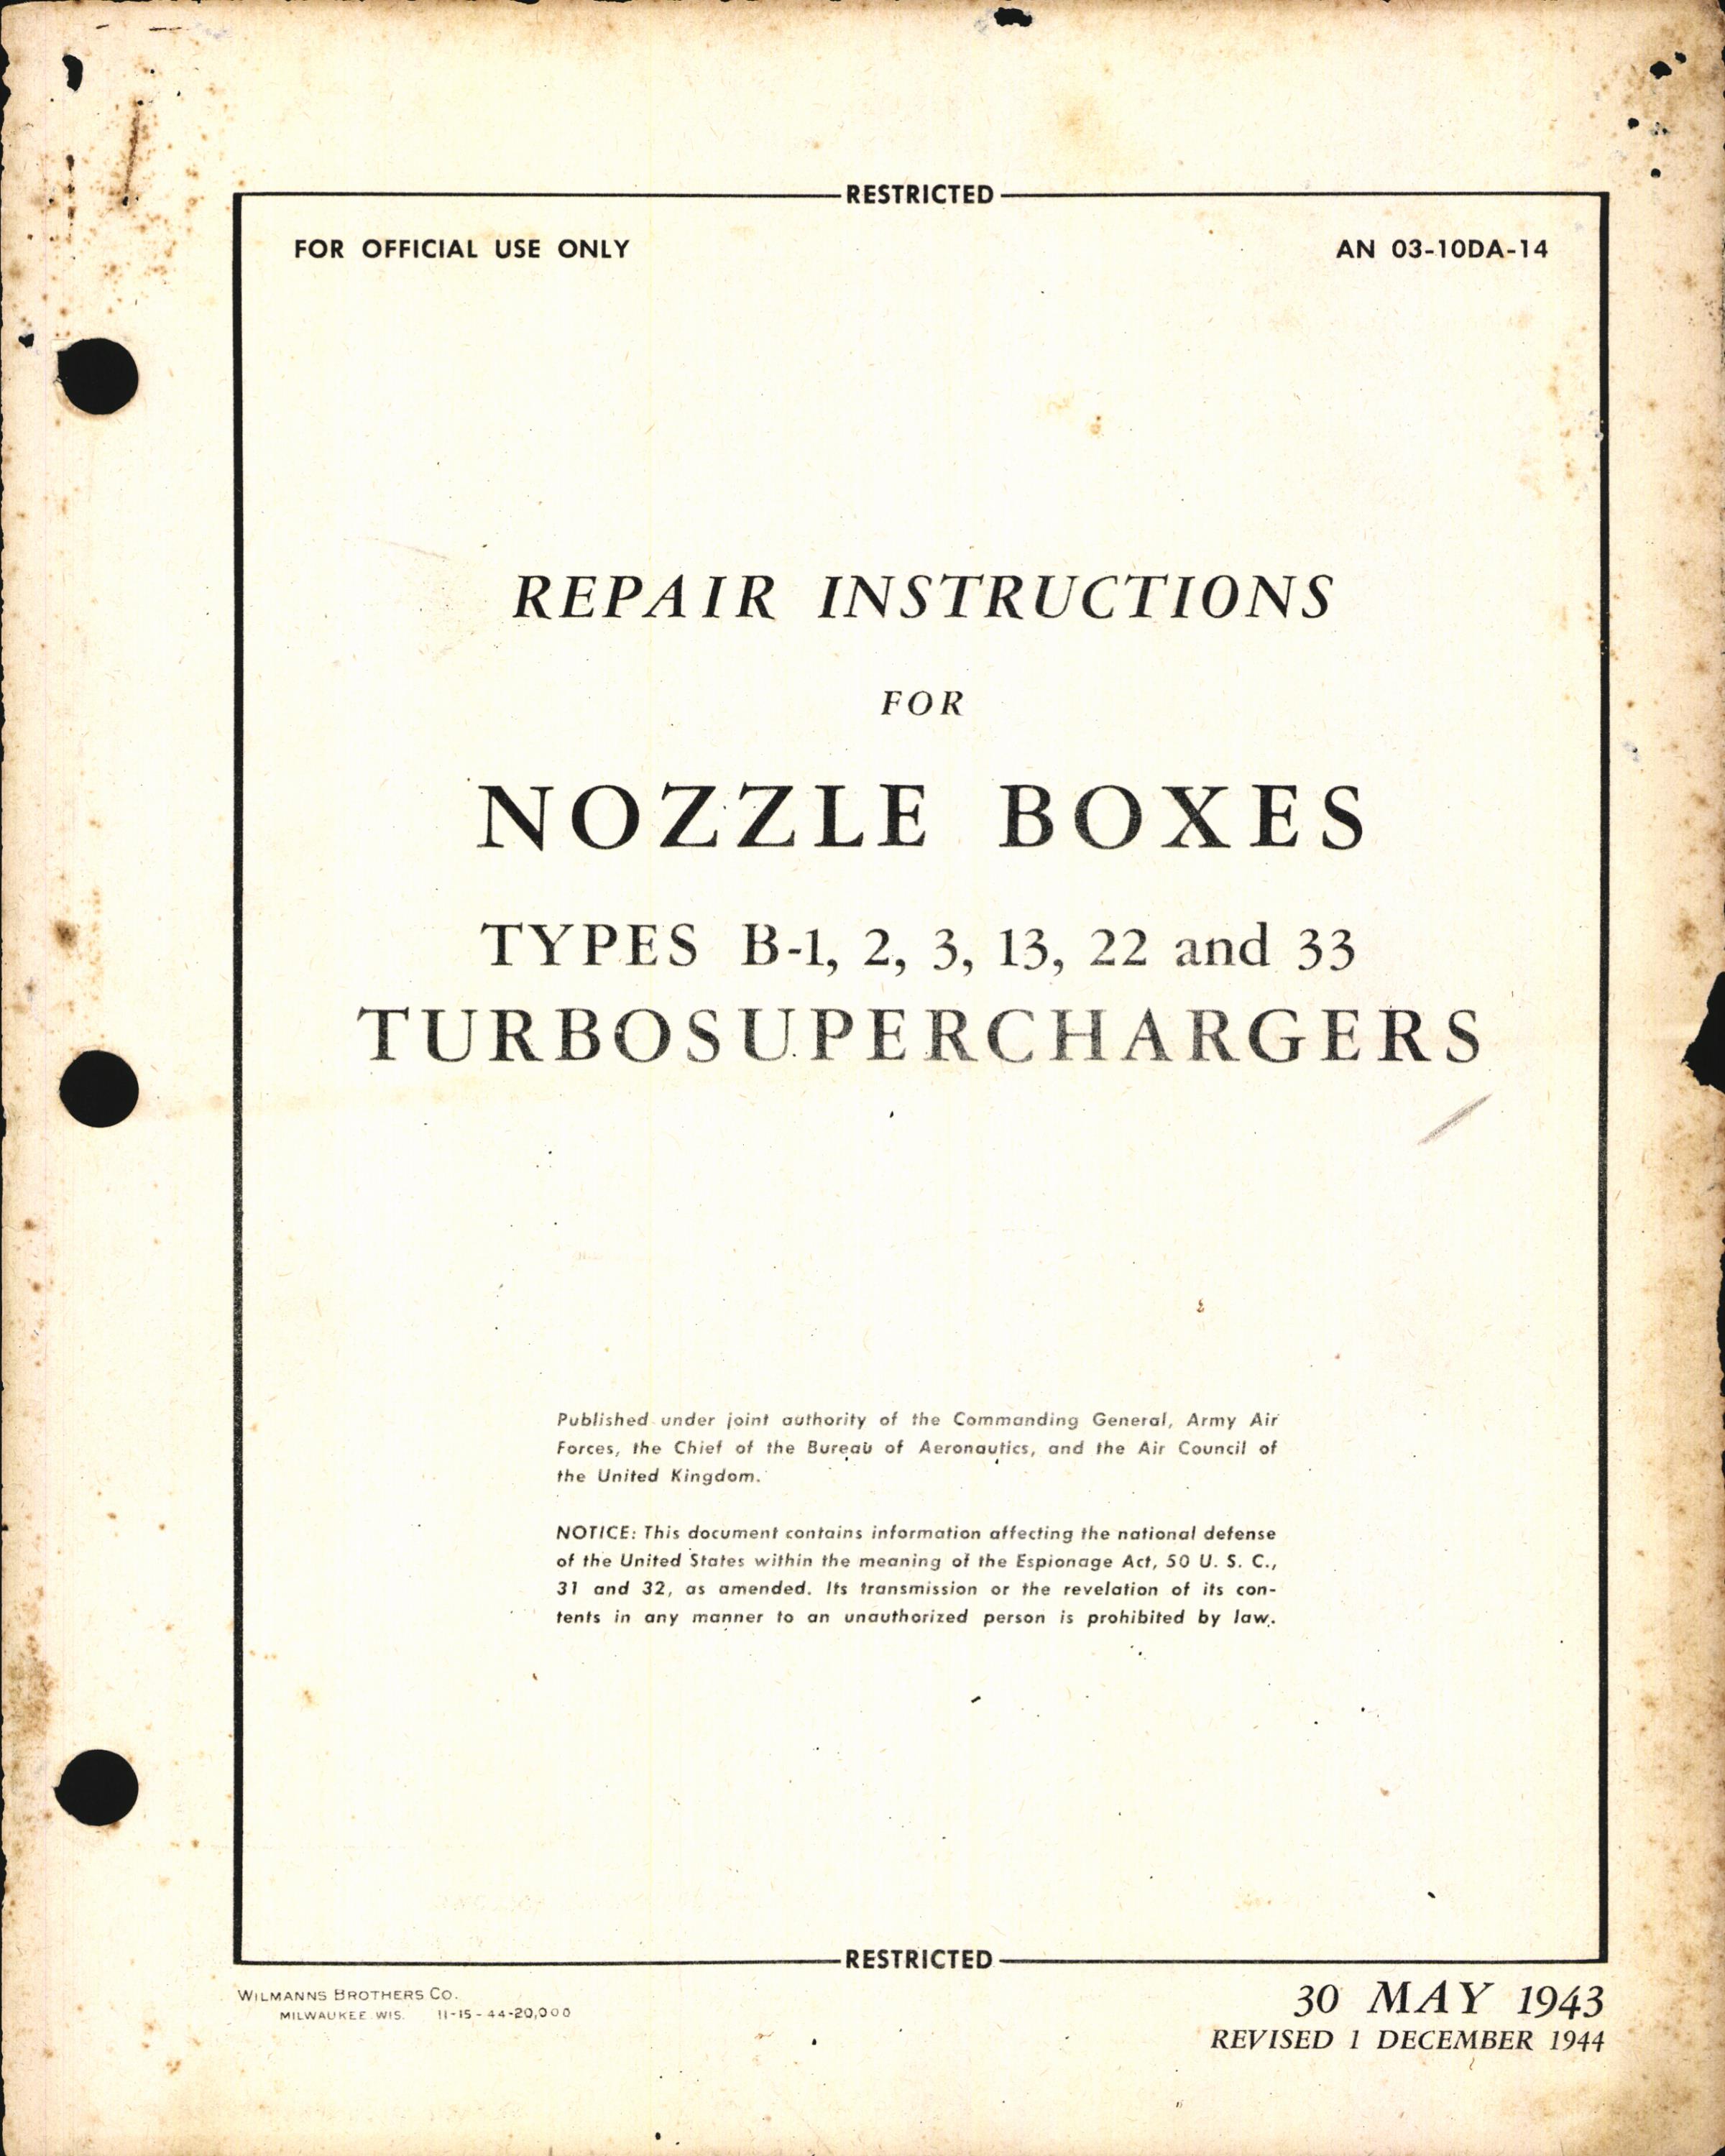 Sample page 1 from AirCorps Library document: Repair Instructions for Nozzle Boxes Types B-1, 2, 3, 13, 22, & 33 Turbosuperchargers